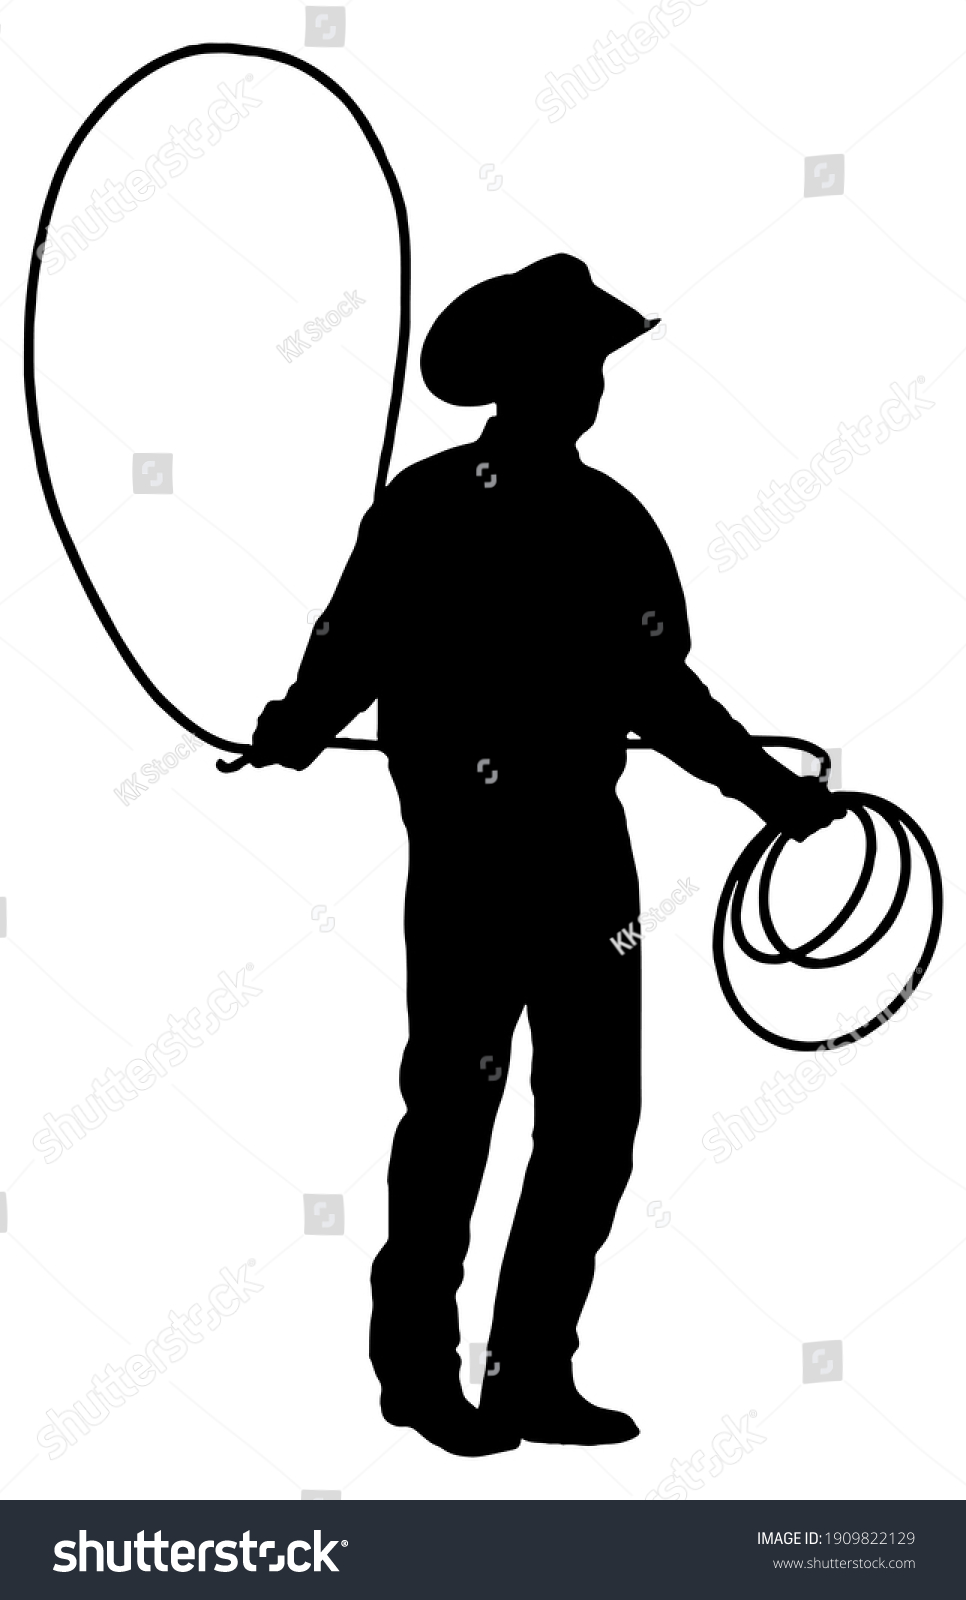 SVG of Cowboy with lasso rope silhouette svg